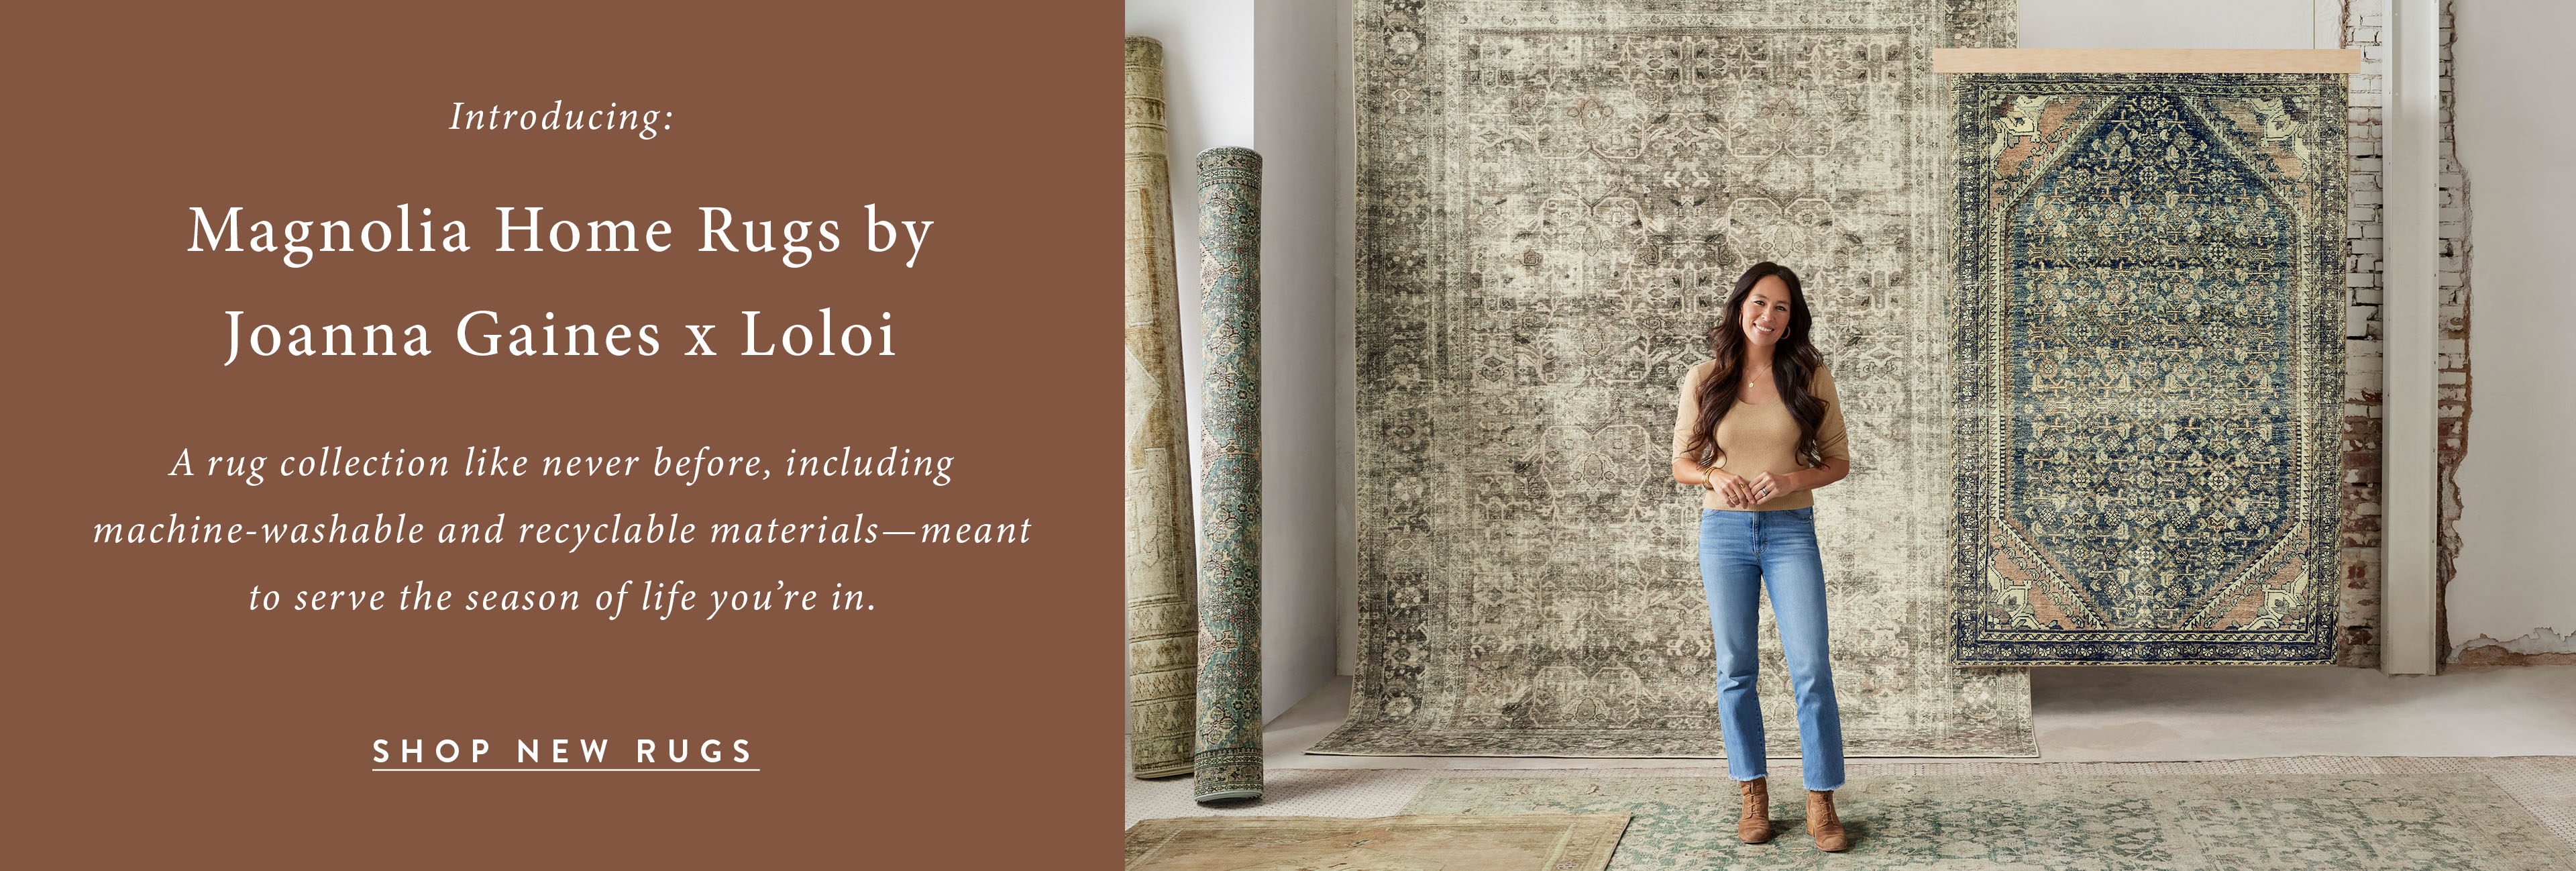 Magnolia Home Rugs by Joanna Gaines x Loloi. Joanna gaines stands in front of rugs hanging on walls